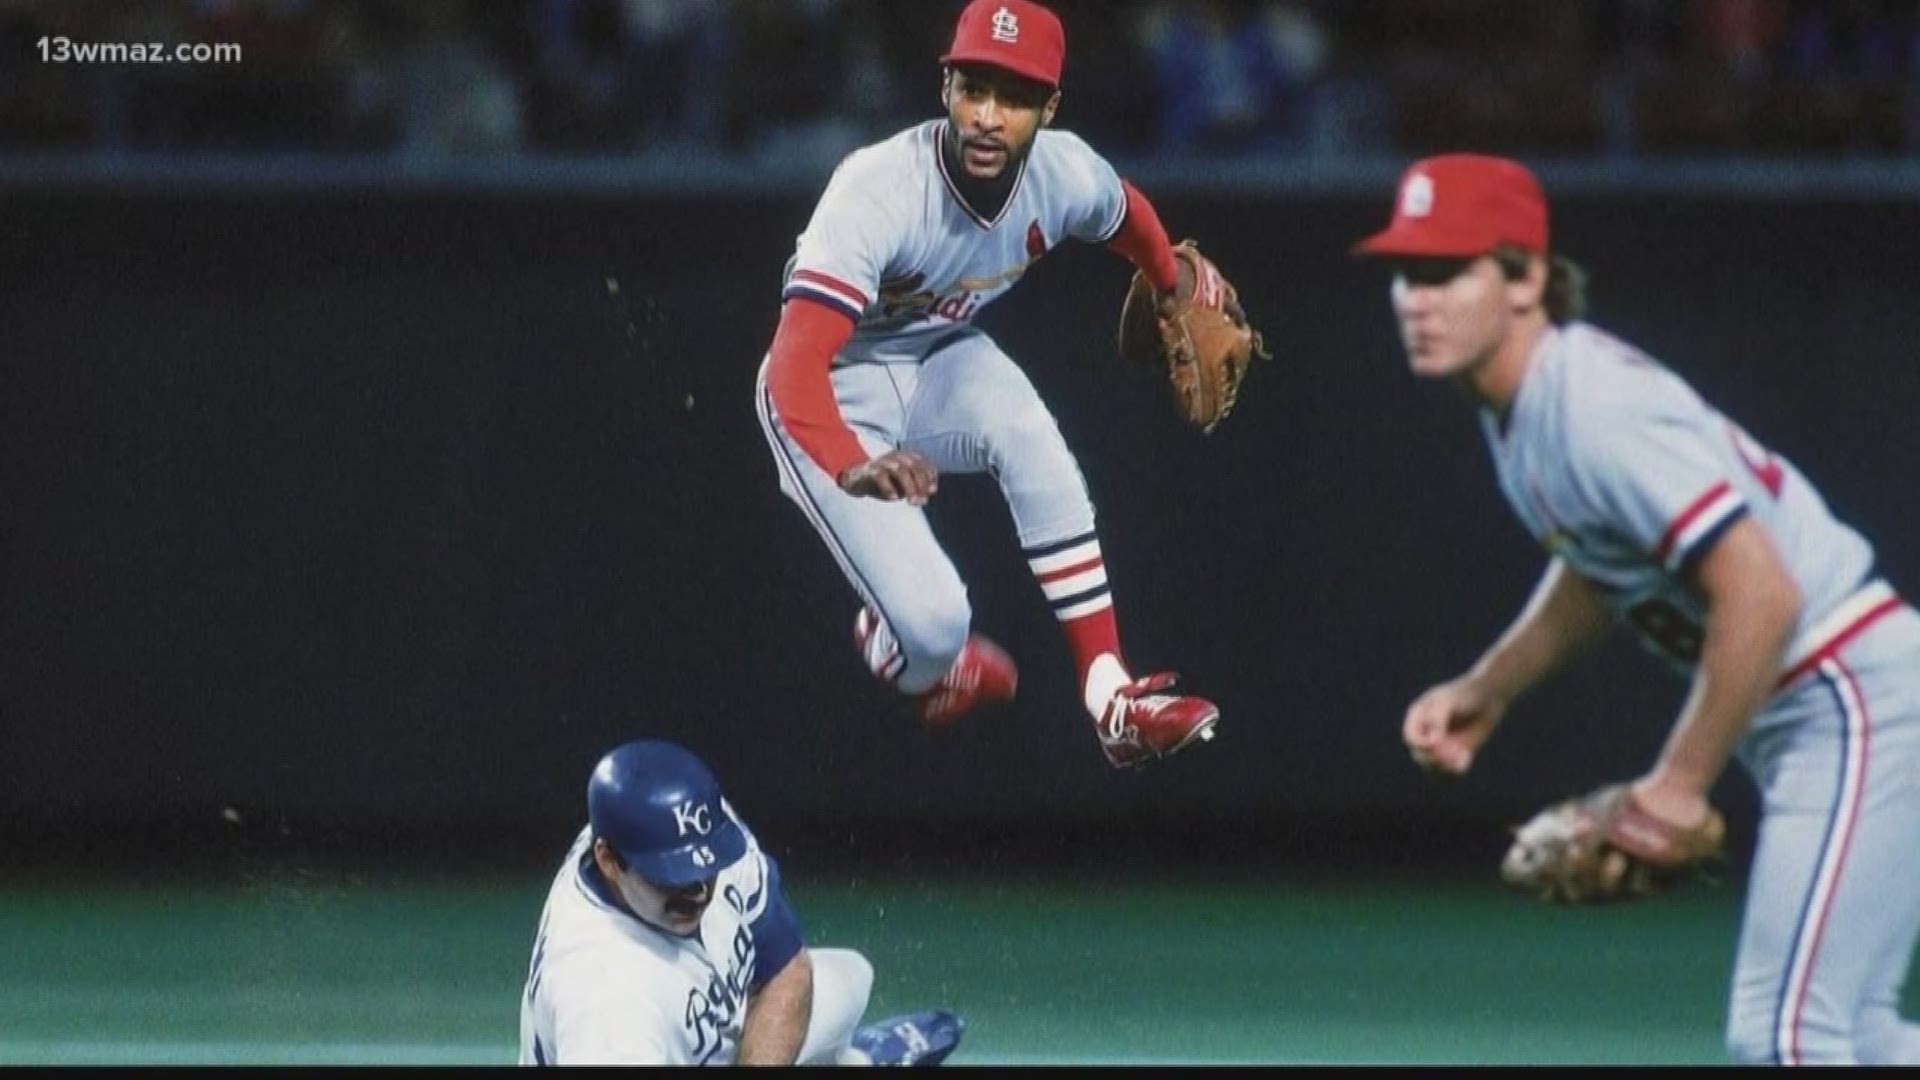 In baseball news, Mercer announced that MLB great Ozzie Smith will be the keynote speaker at the First Pitch Classic in February 2020.